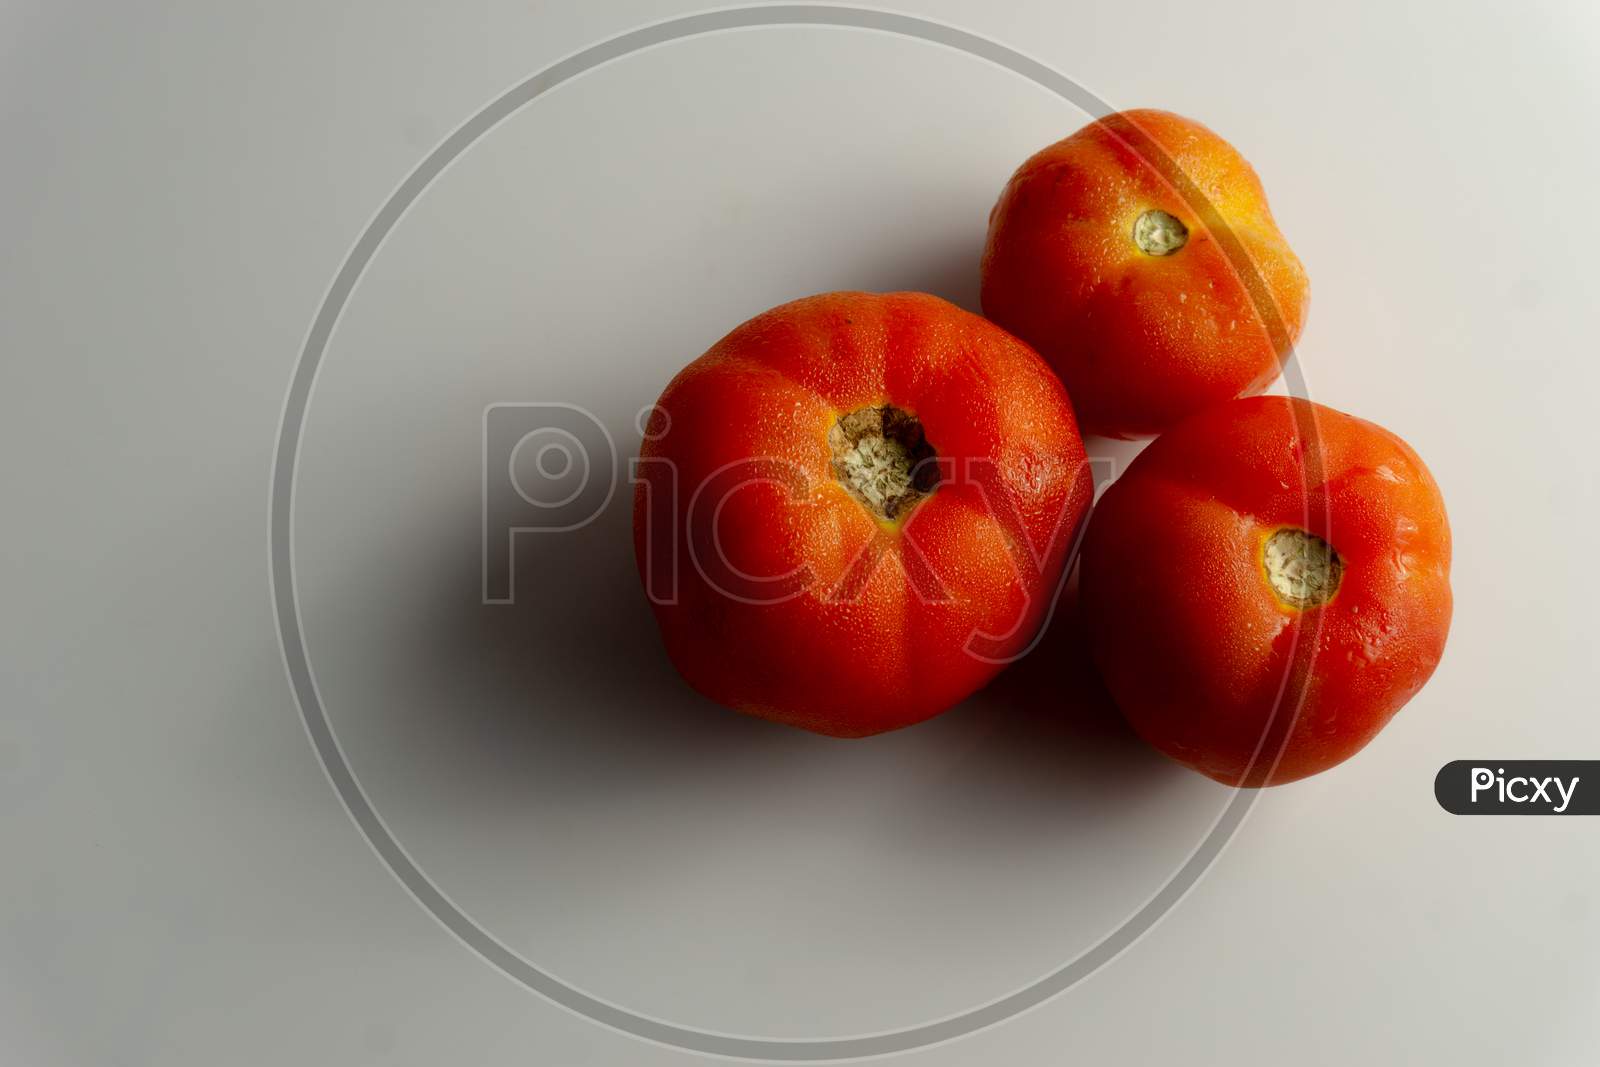 Three Red Tomatoes On The Table